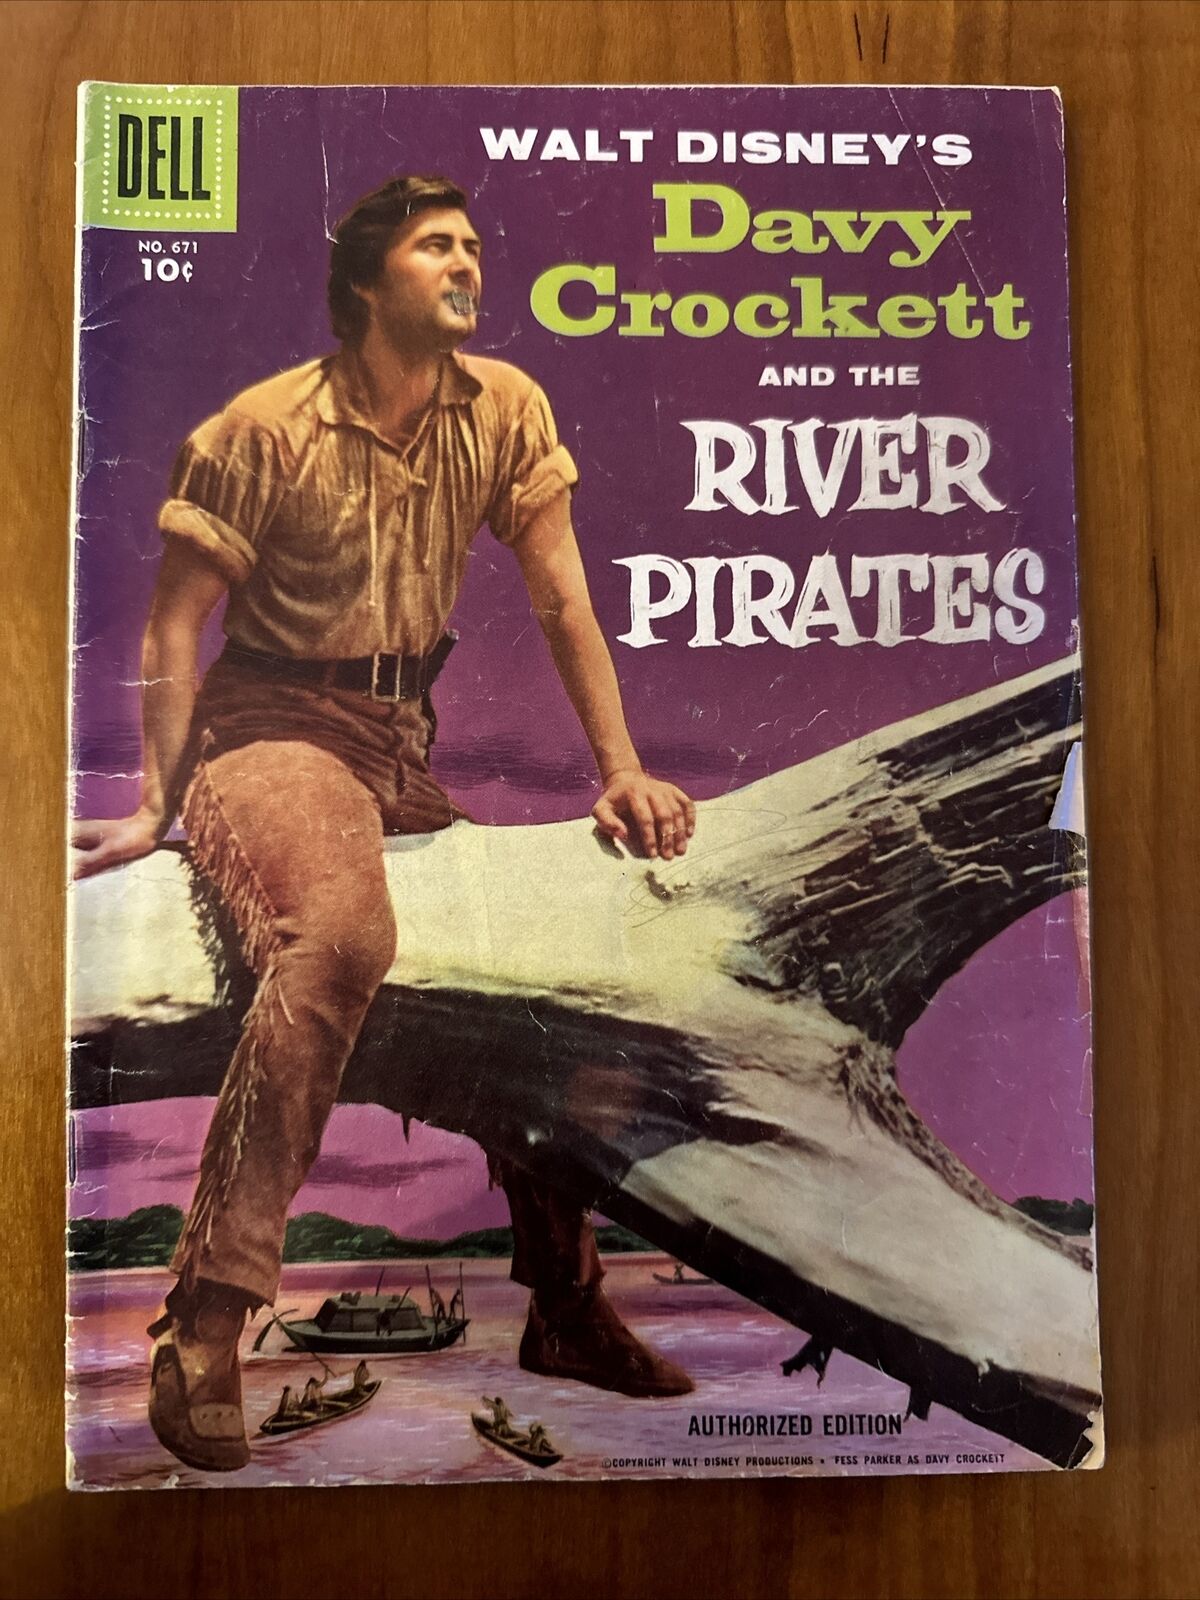 Walt Disney’s Davy Crockett And The River Pirates Comic Book Vintage 1955 DELL